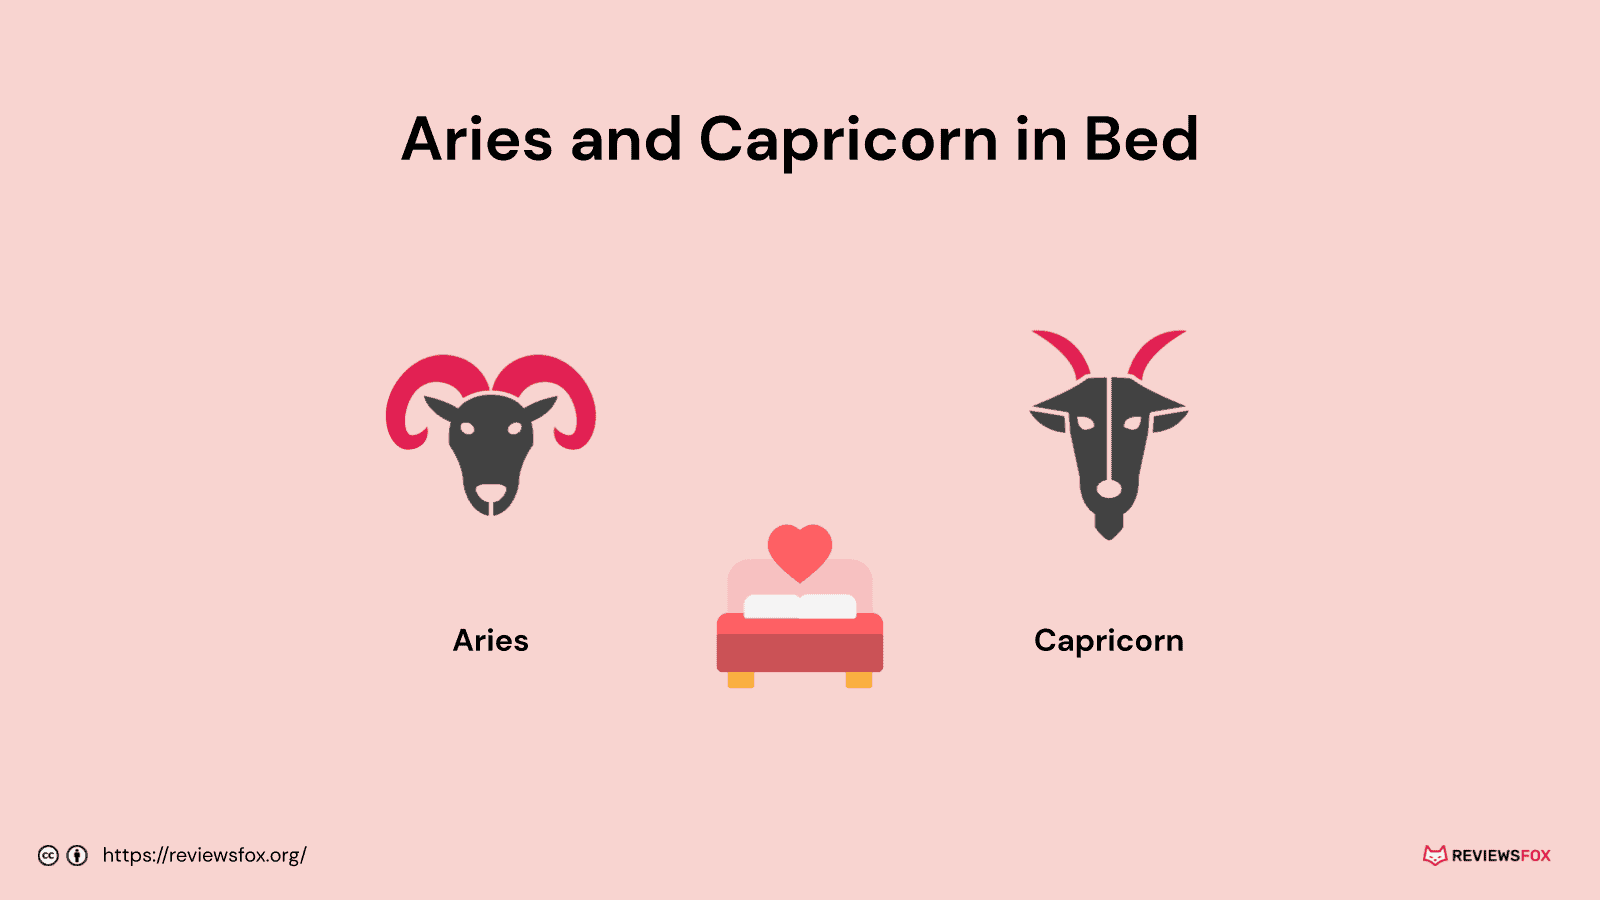 Aries and Capricorn in bed